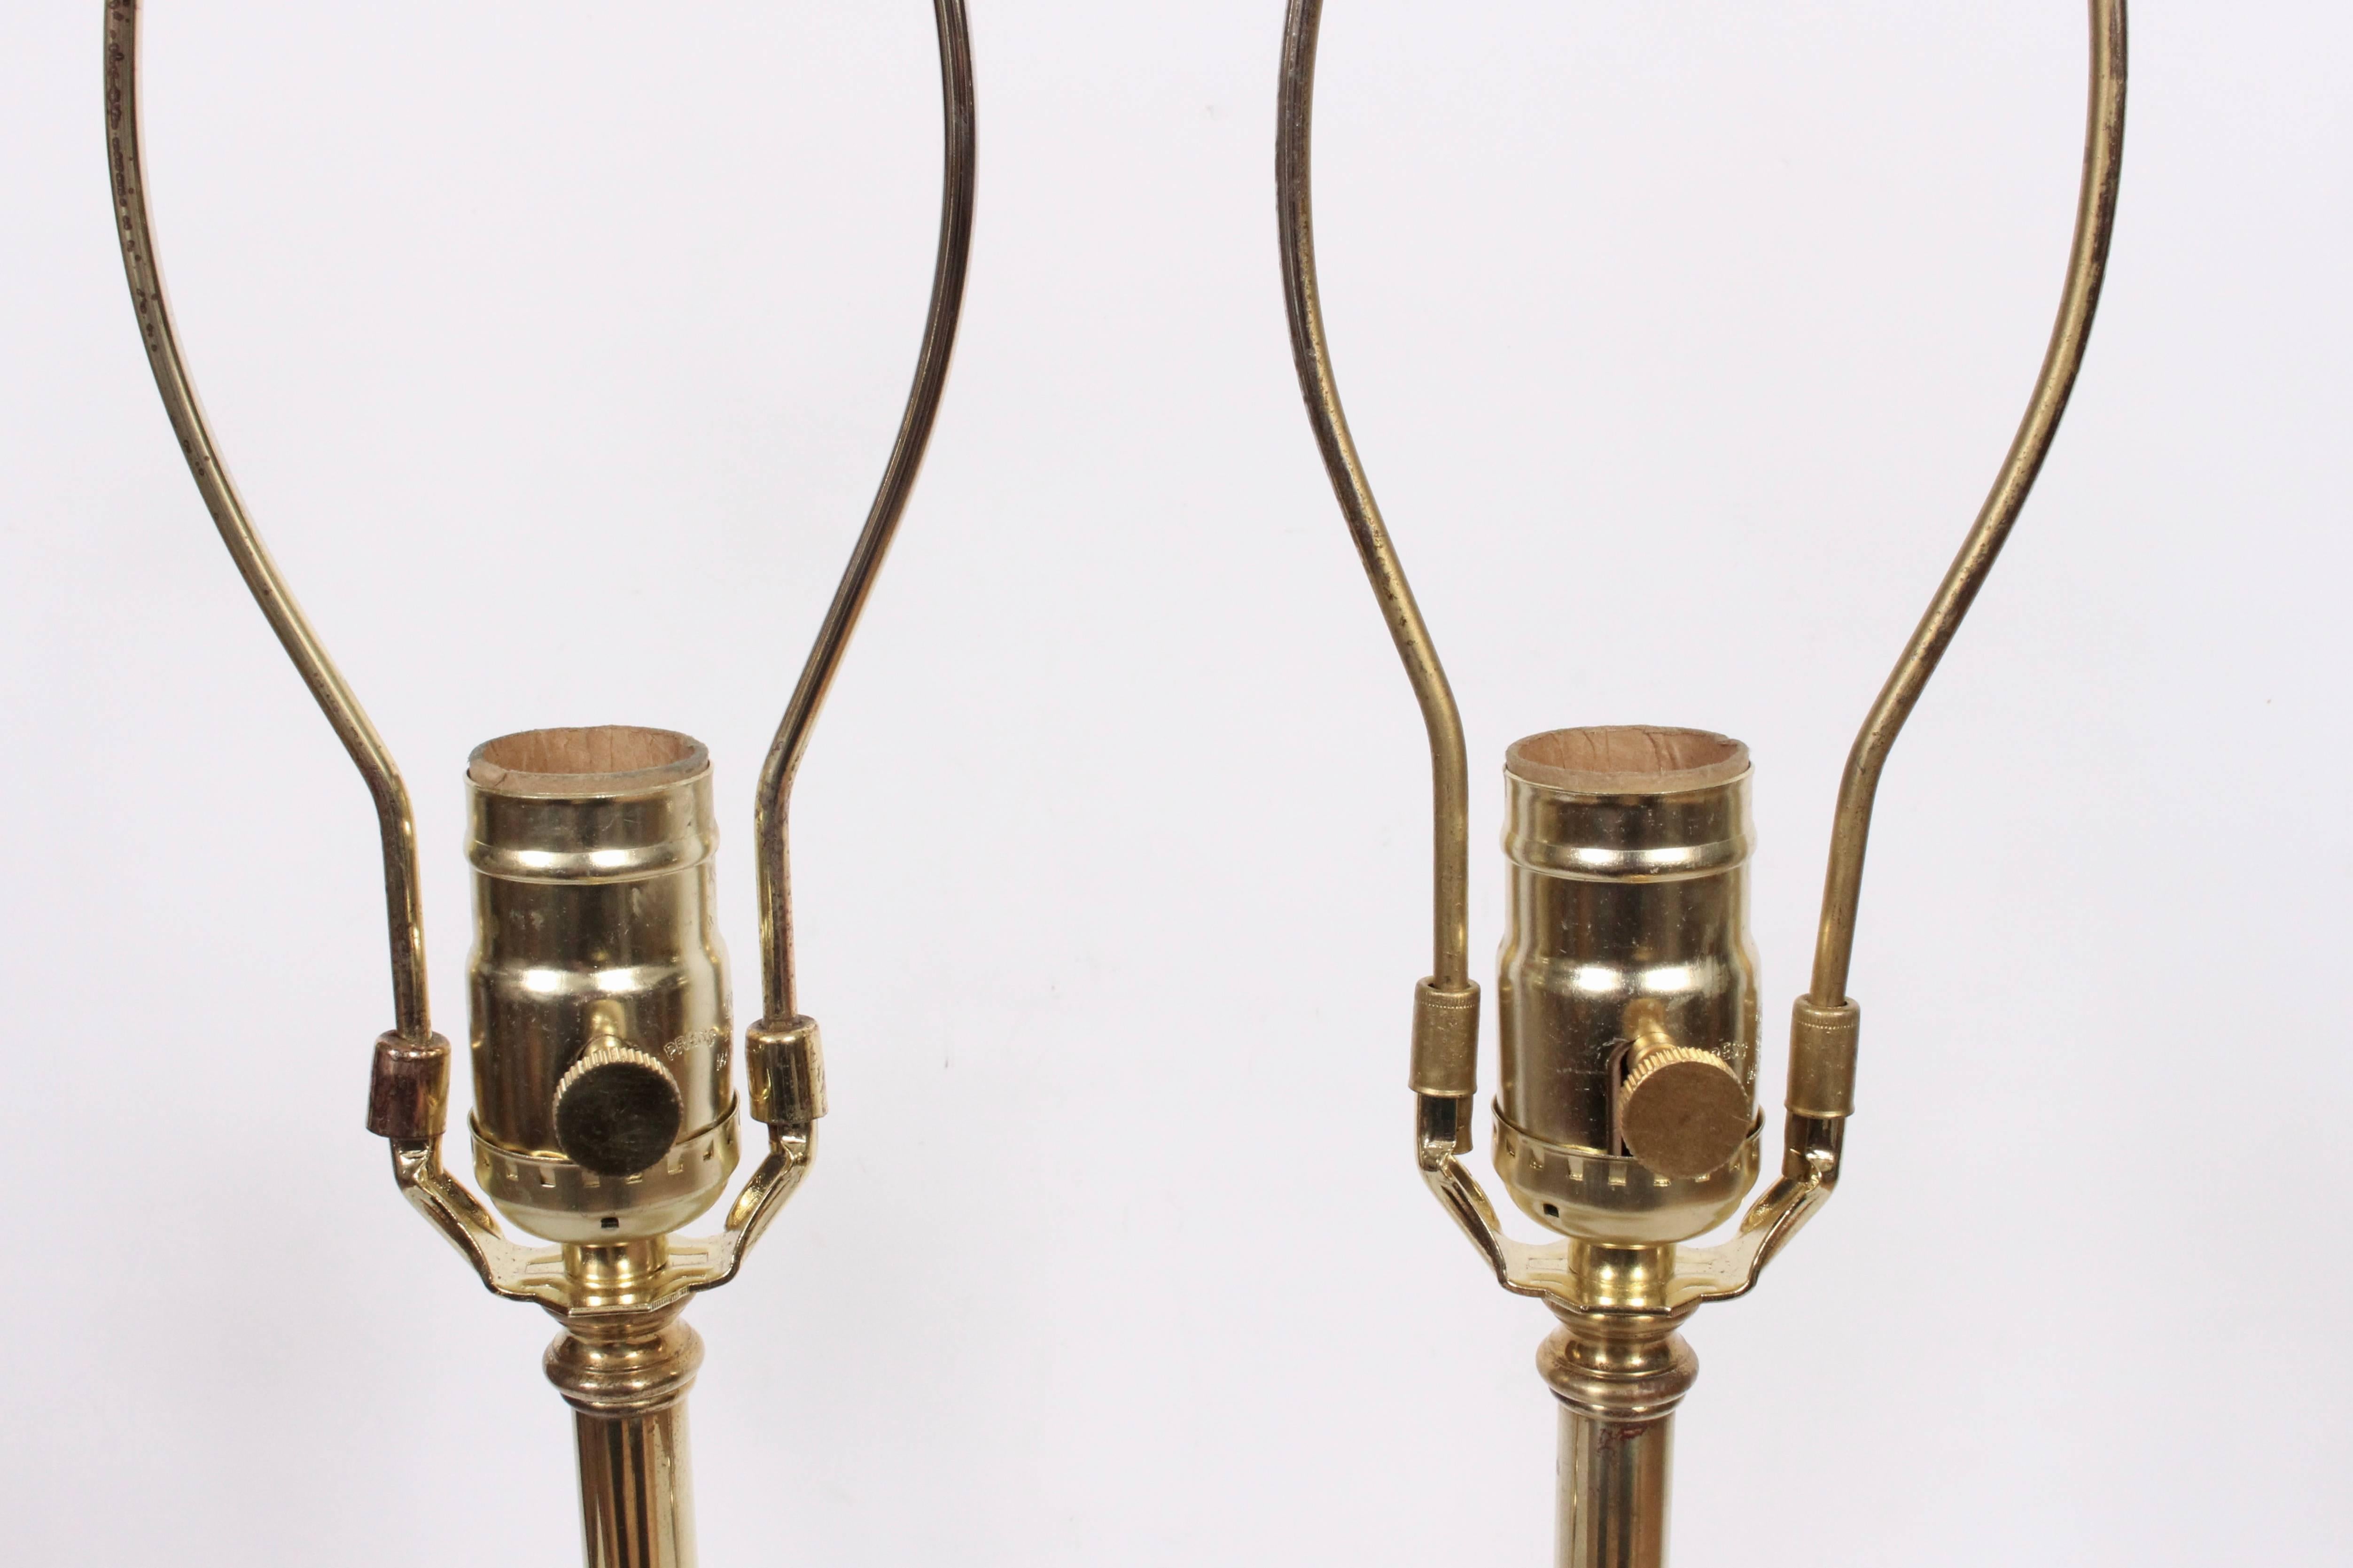 Plated Pair of Hand Buffed Brass Double Twist Bedside Lamps, C. 1950